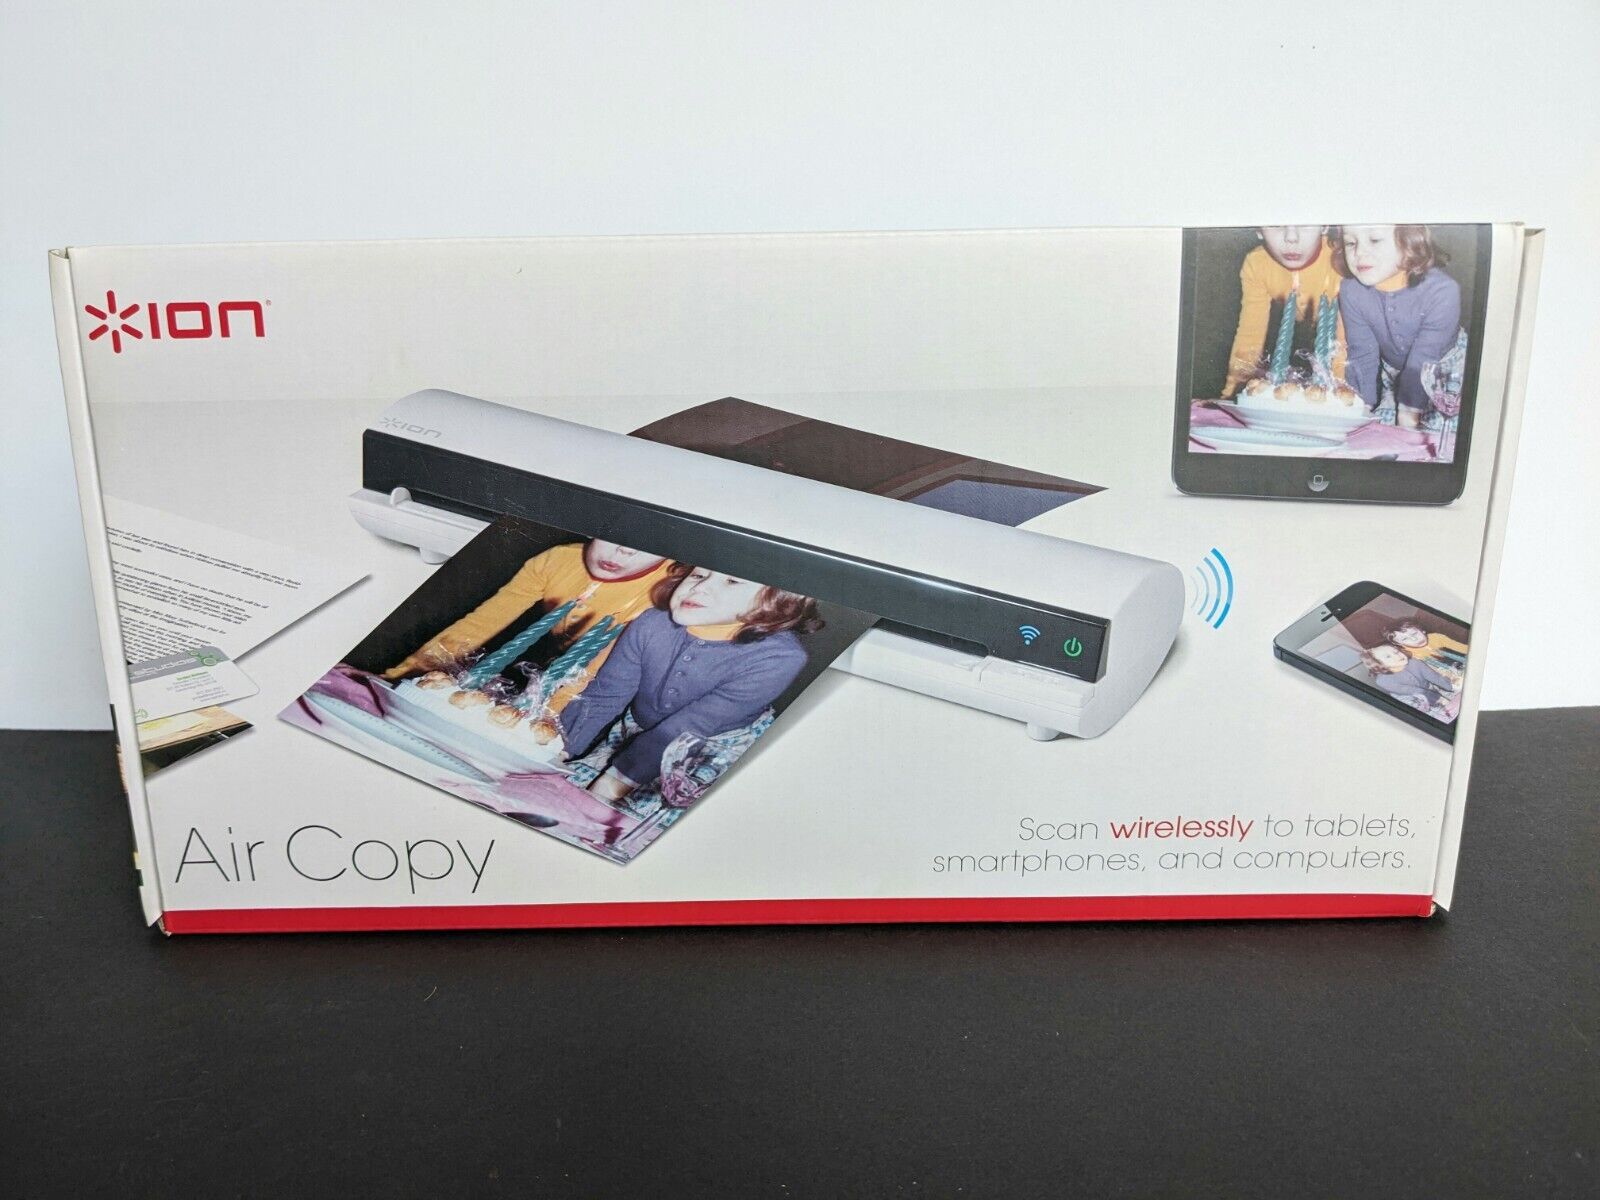 ION Air Copy Wireless Photo & Document Scanner with Built-in WiFi - New in Box